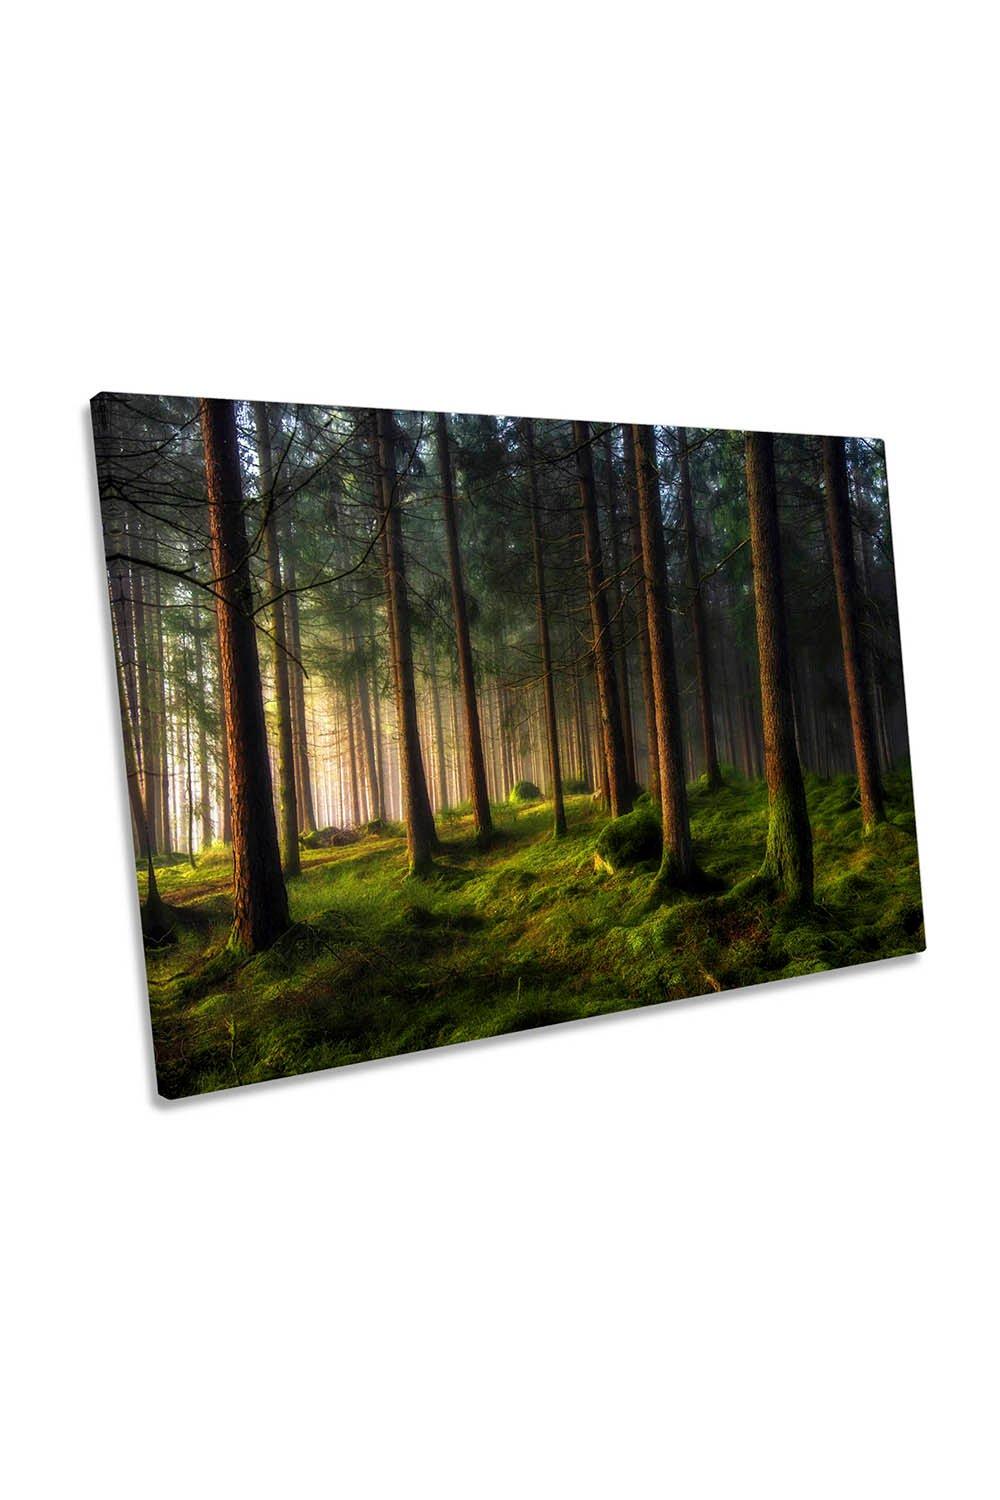 A Sense of Spring in the Forest Landscape Canvas Wall Art Picture Print